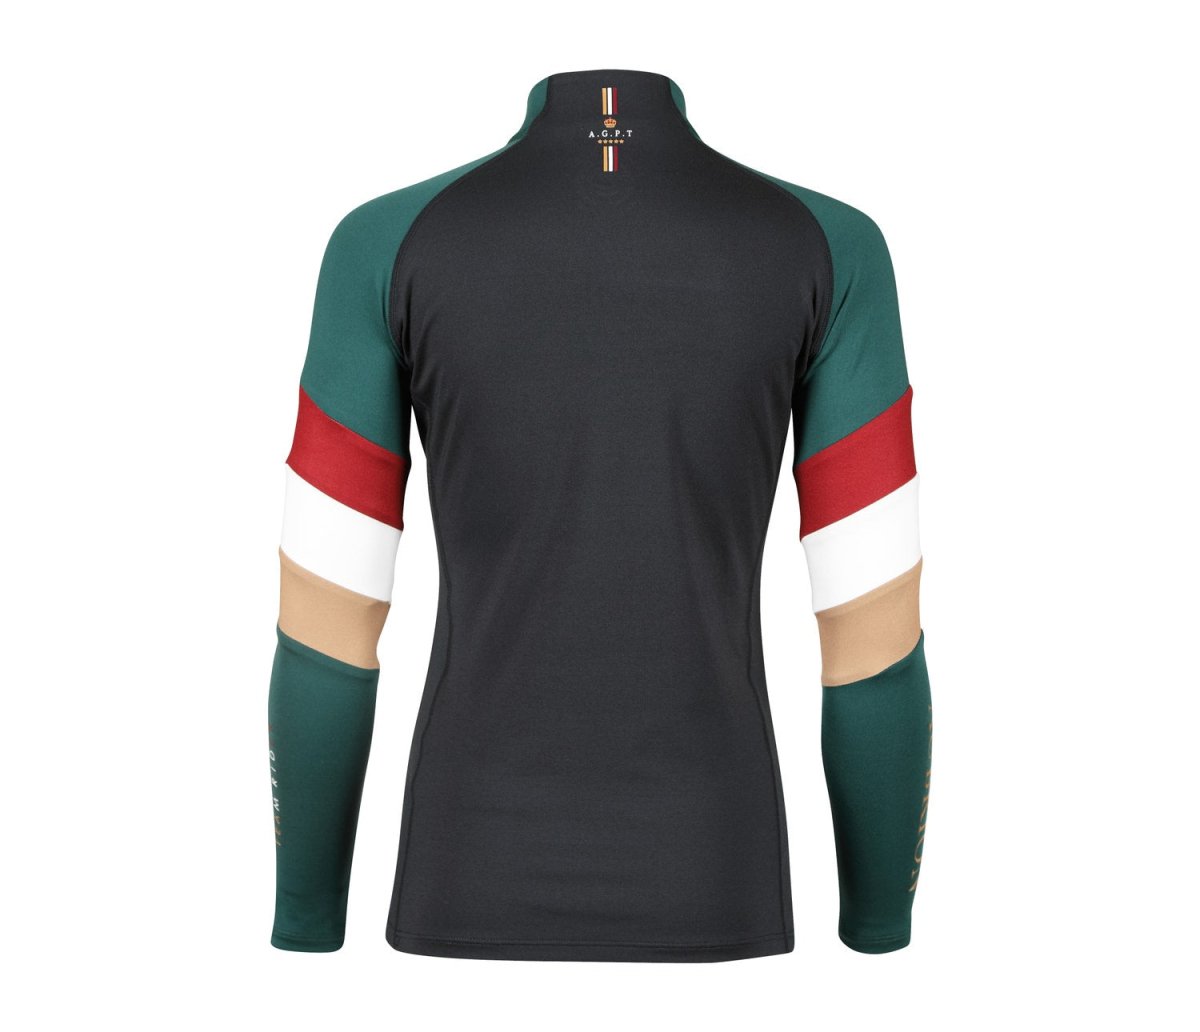 Aubrion SS24 Team Long Sleeve Base Layer - Young Rider - Black - 11/12 Years